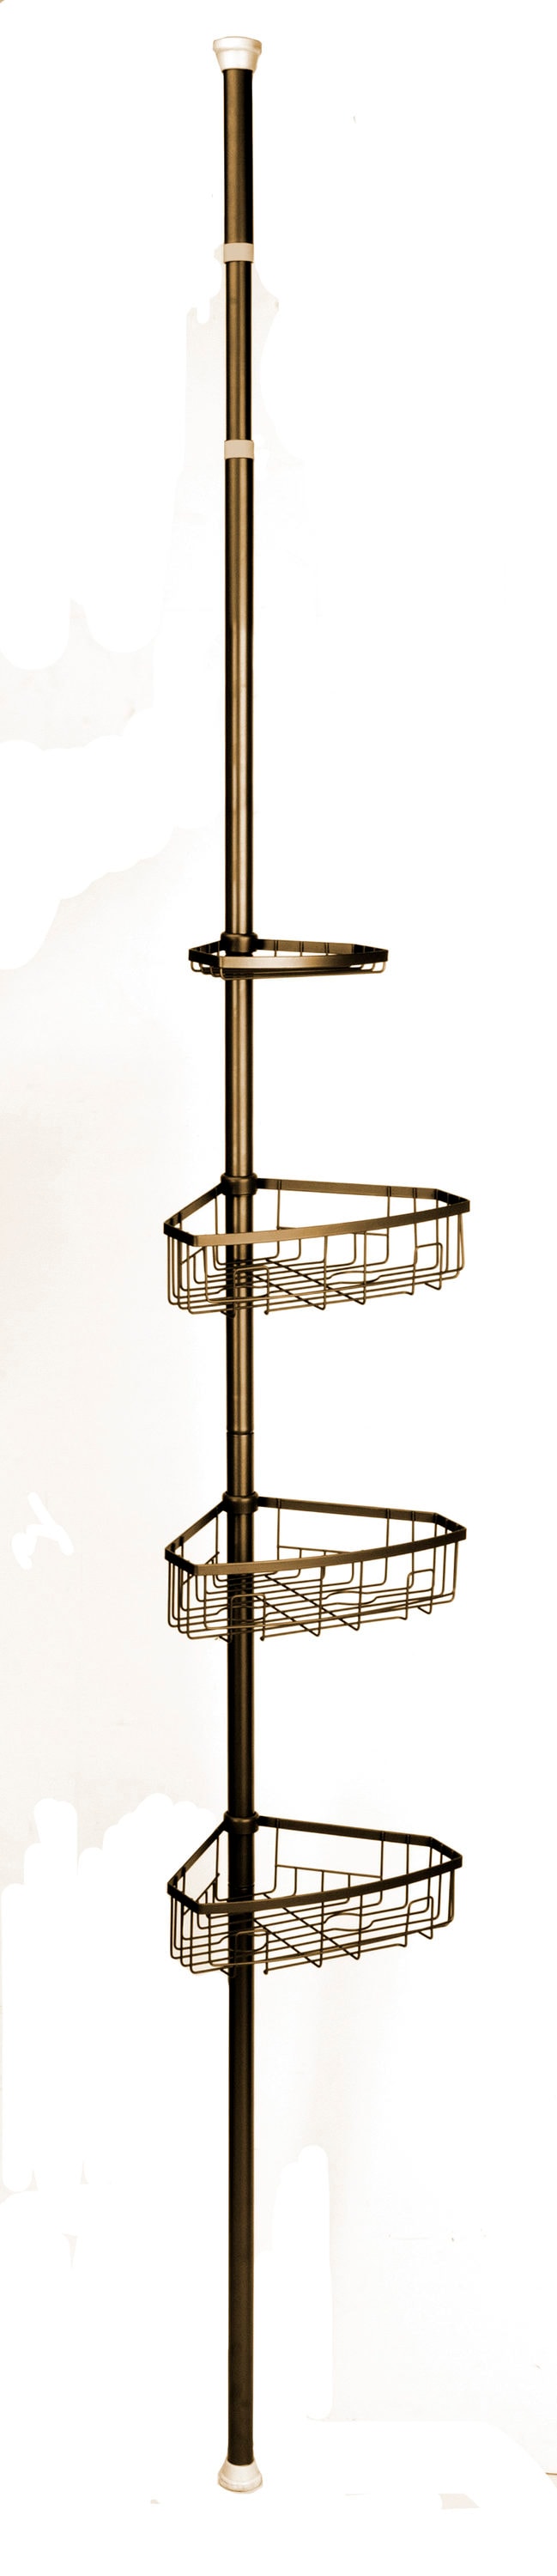 Style Selections Oil-Rubbed Bronze Steel 4-Shelf Tension Pole Freestanding Shower  Caddy 10.5-in x 8.5-in at